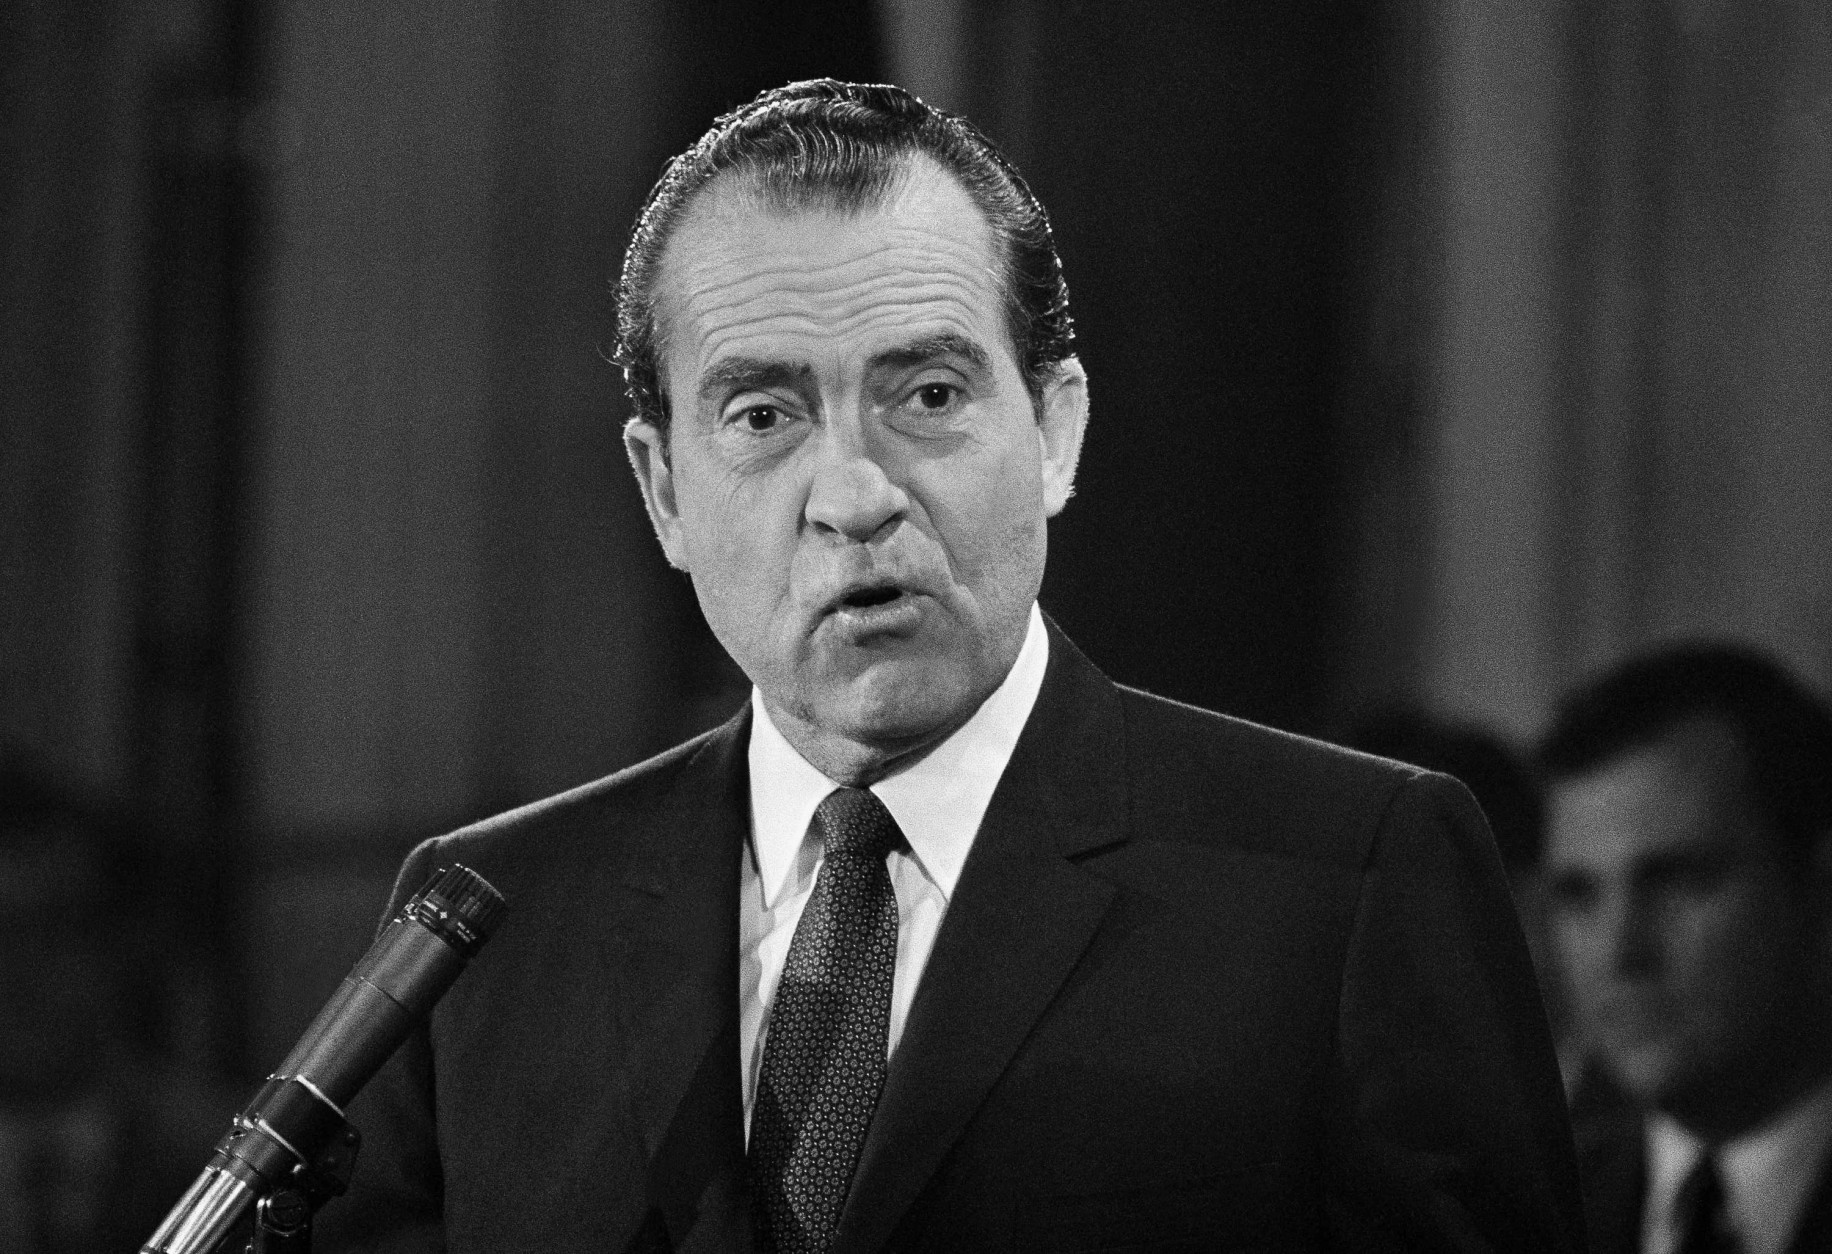 President Richard Nixon talked hopefully of the possibility that the Soviet Union might help in achieving a settlement in the Middle East and in Vietnam, during a news conference, March 4, 1969 in the White House in Washington.  The president used the news conference to report to the nation news of his journey to allied capitals in Europe. (AP Photo)